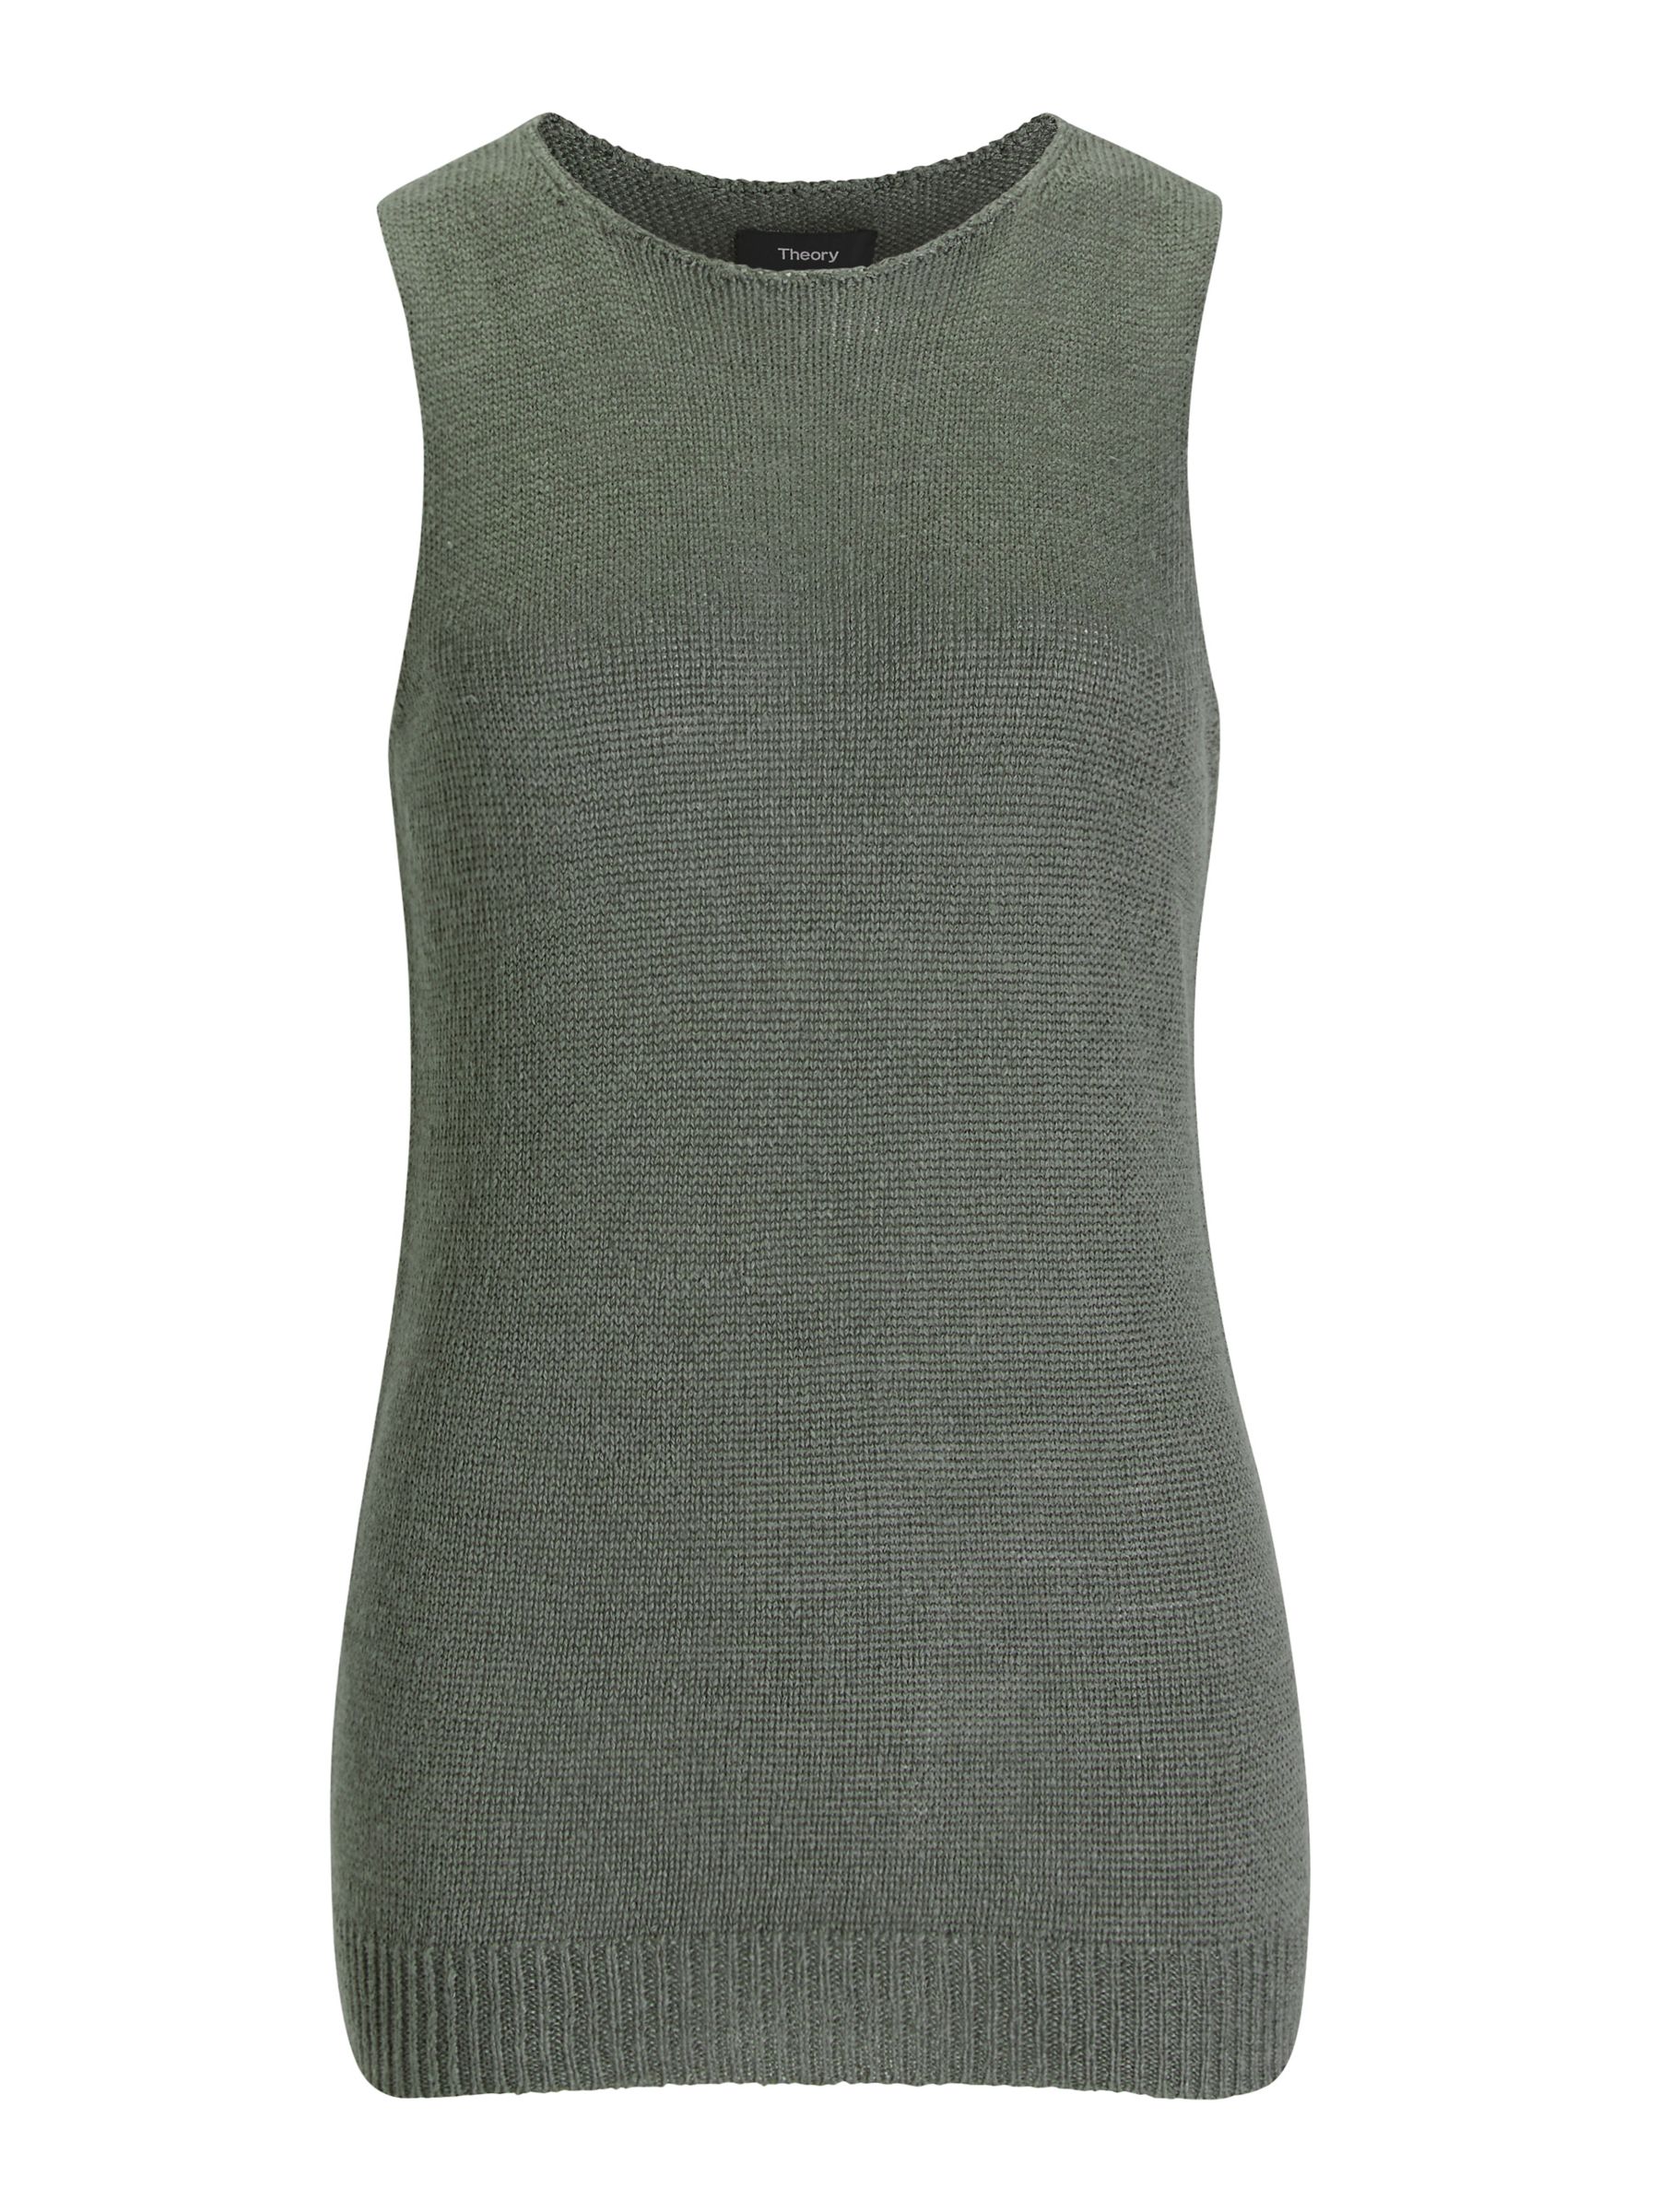 Theory Sleeveless Knitted Top, Pale Green at John Lewis & Partners